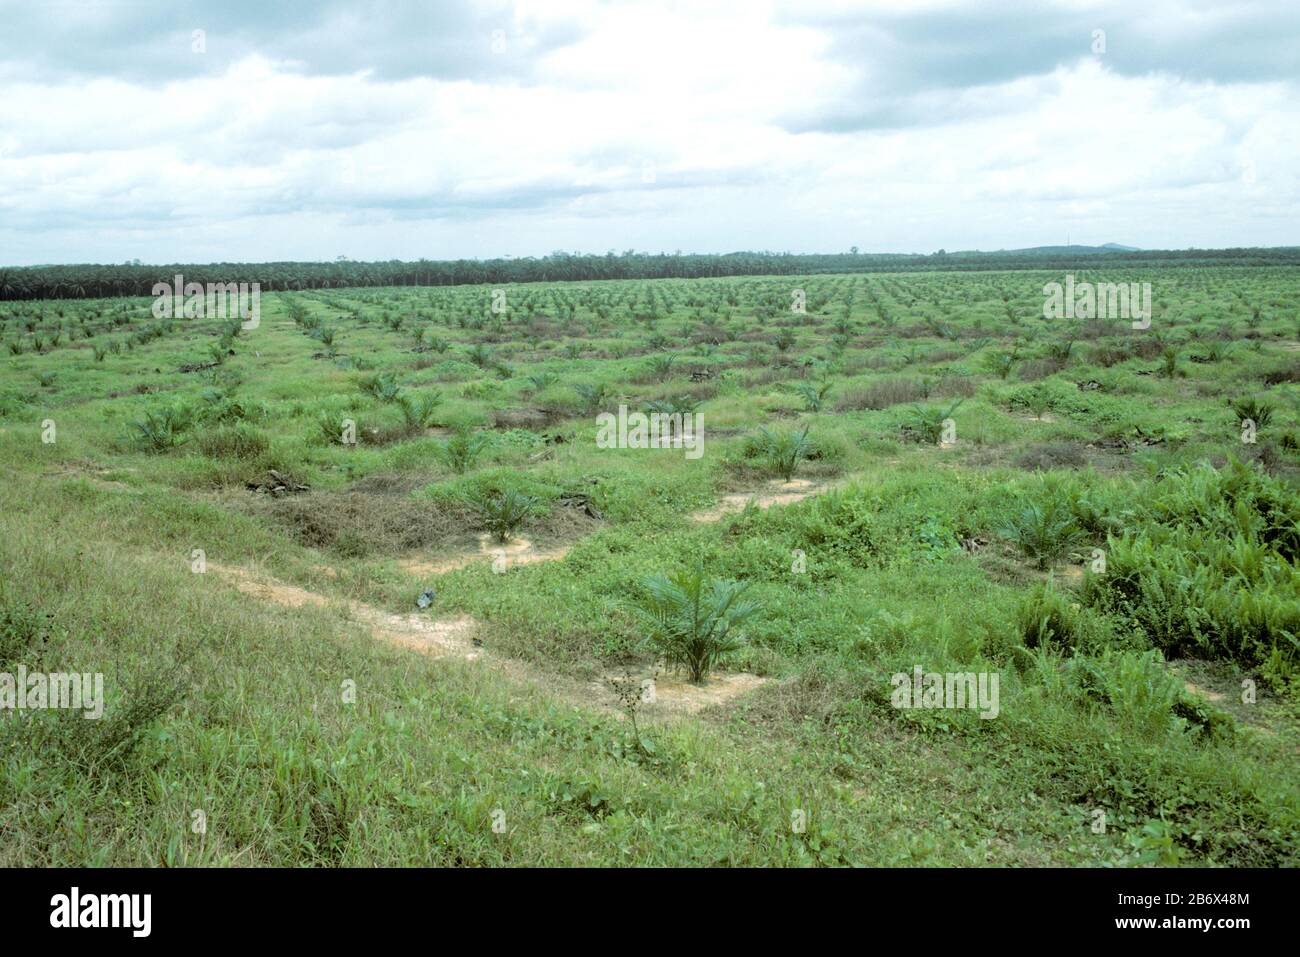 Young plantation of oil palm (Elaeis guineensis) in area cleared for planting and agriculture, Malaysia, February Stock Photo